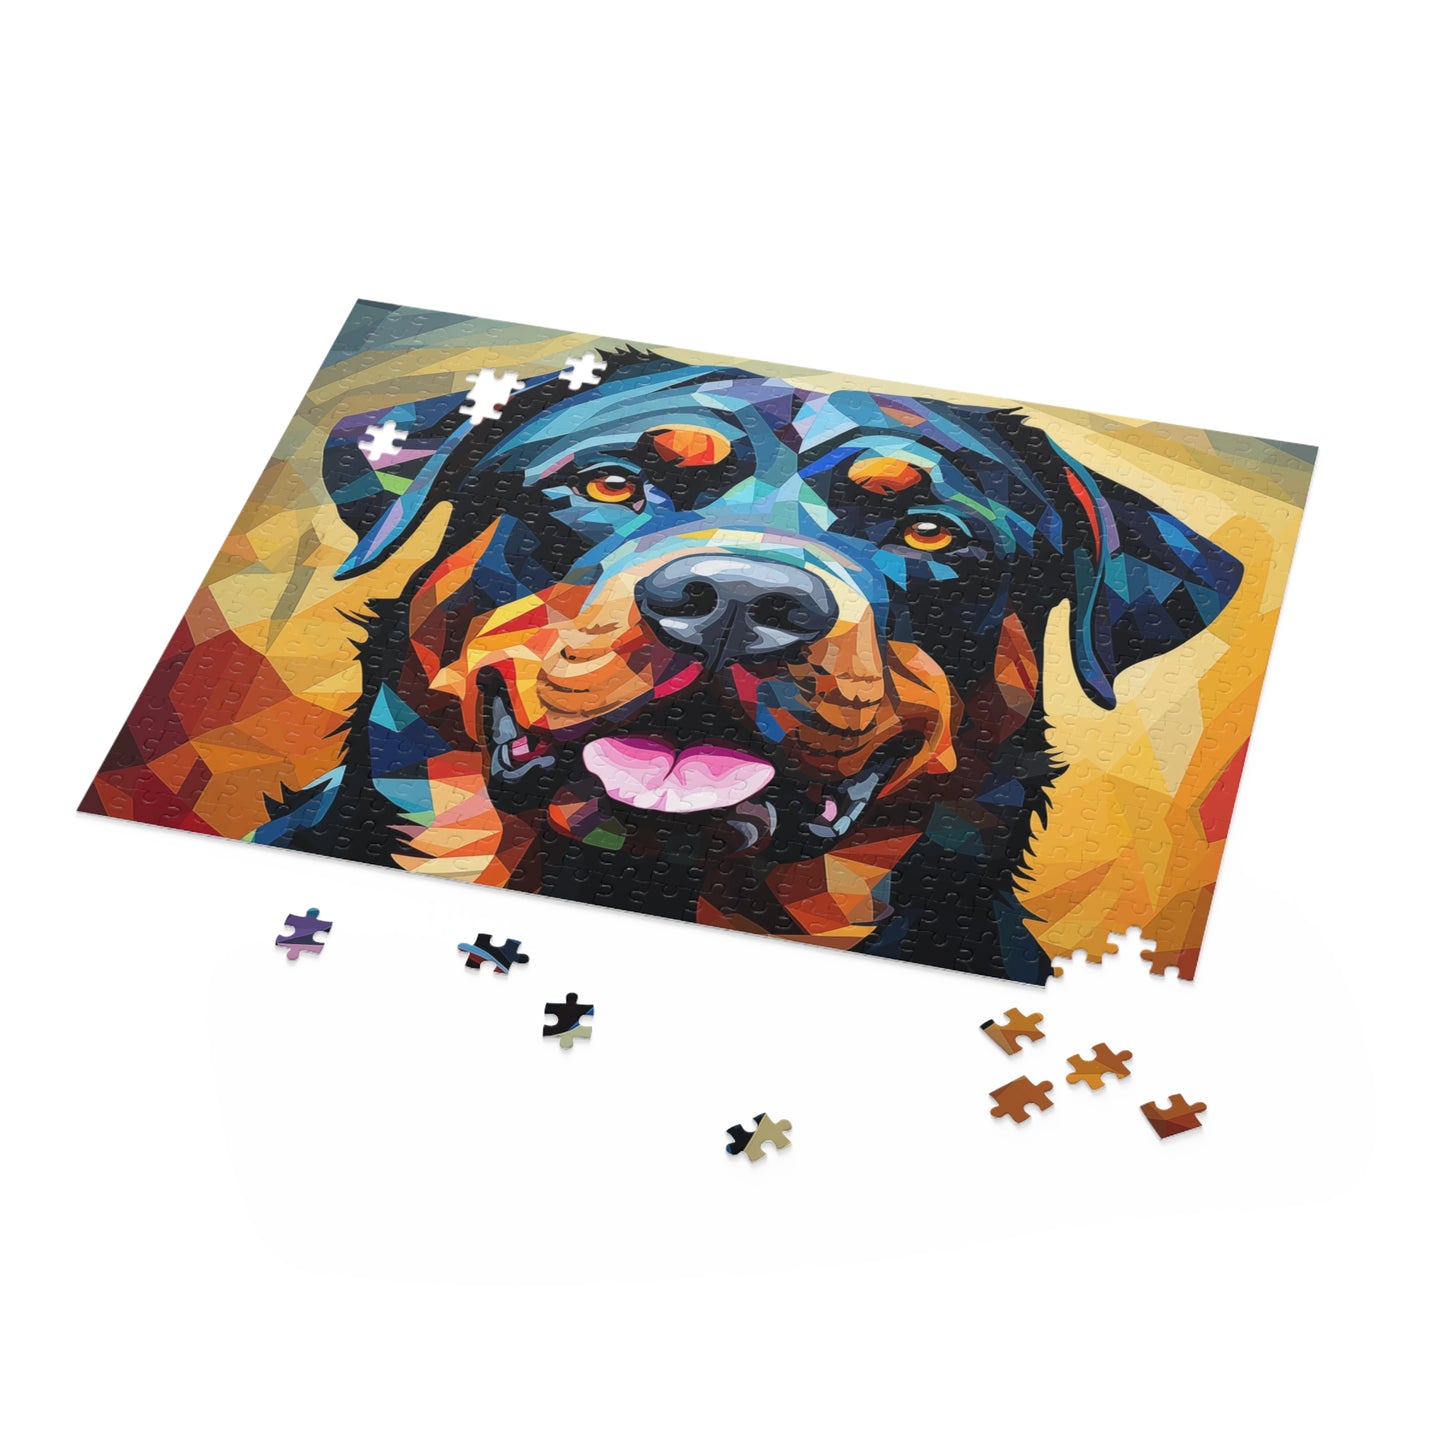 Rottweiler Vibrant Abstract Dog Jigsaw Puzzle Oil Paint Adult Birthday Business Jigsaw Puzzle Gift for Him Funny Humorous Indoor Outdoor Game Gift For Her Online-5